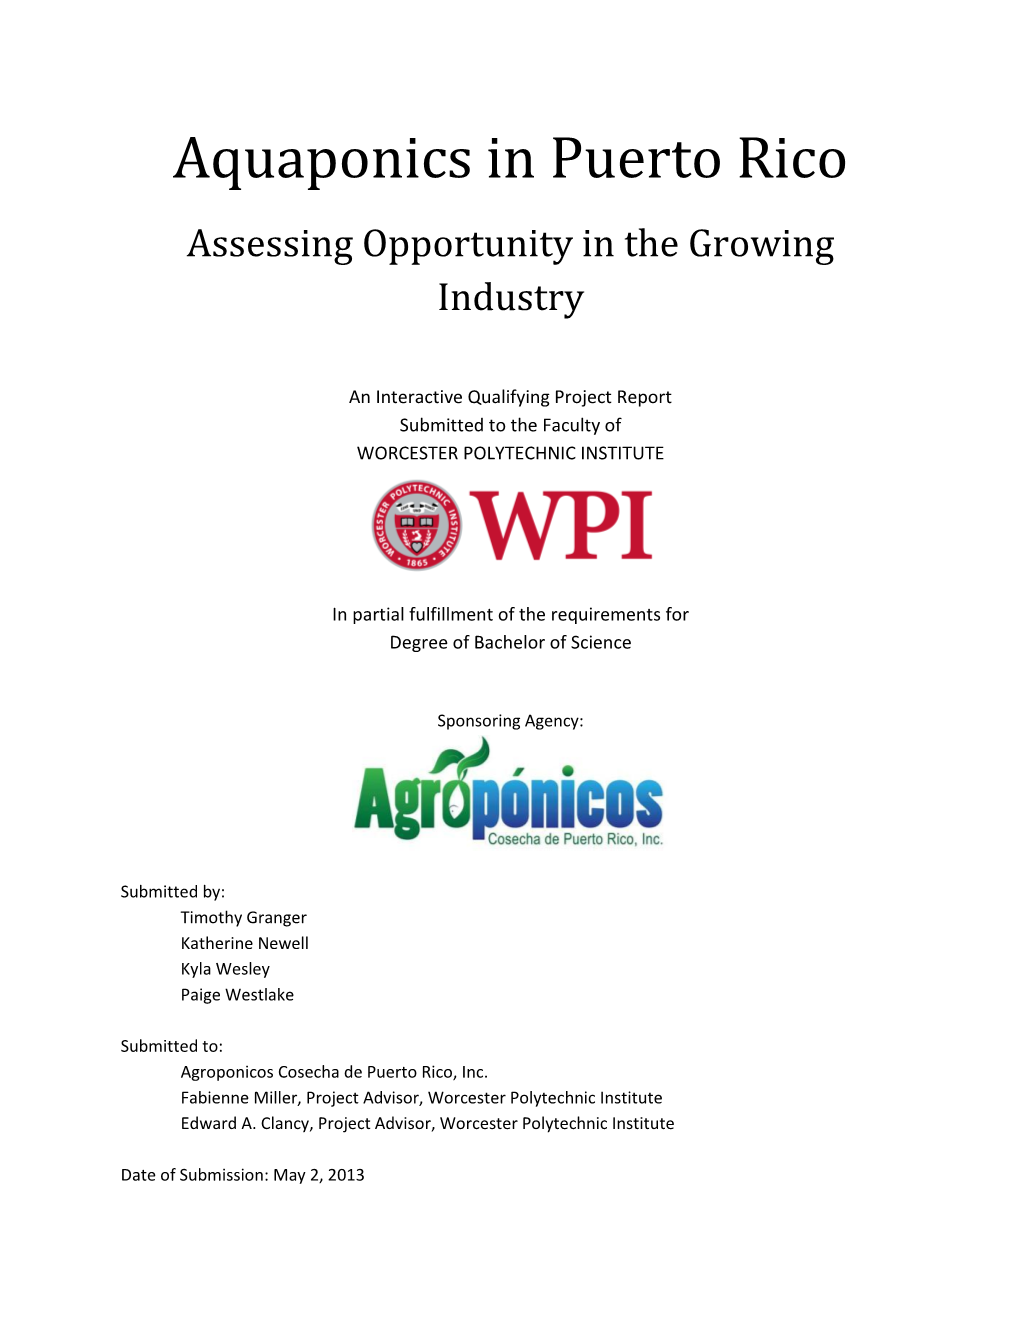 Aquaponics in Puerto Rico Assessing Opportunity in the Growing